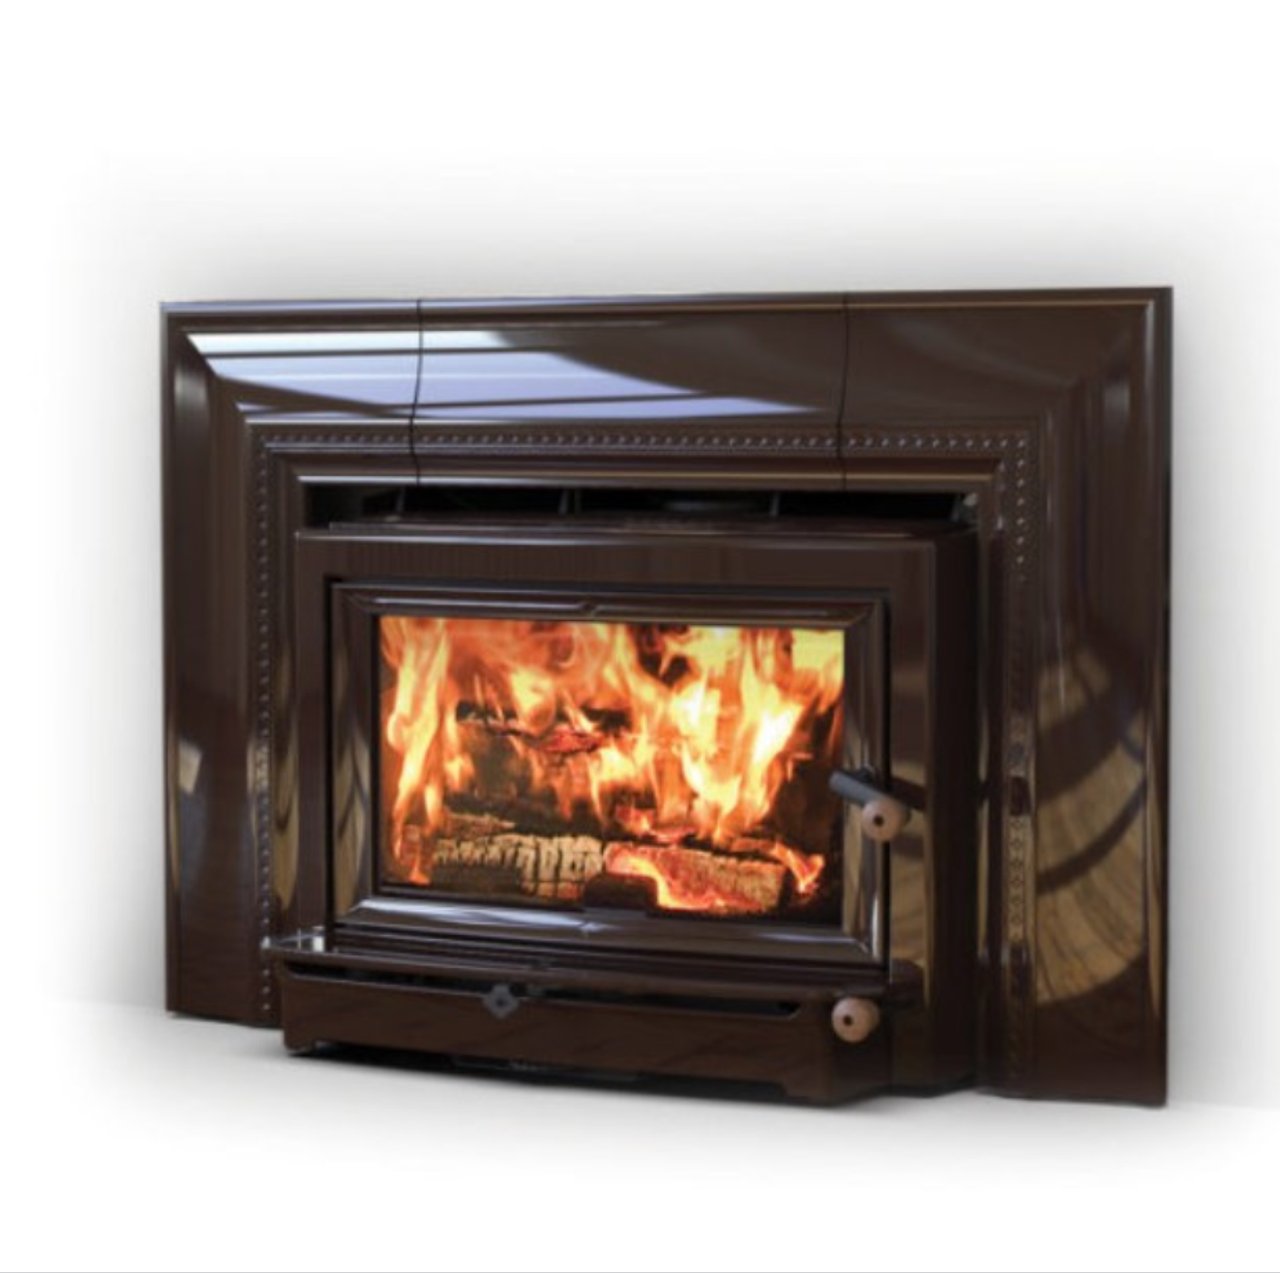 Hearthstone Clydesdale Wood Burning Insert , 8492 Clydesdale in Enamel Brown